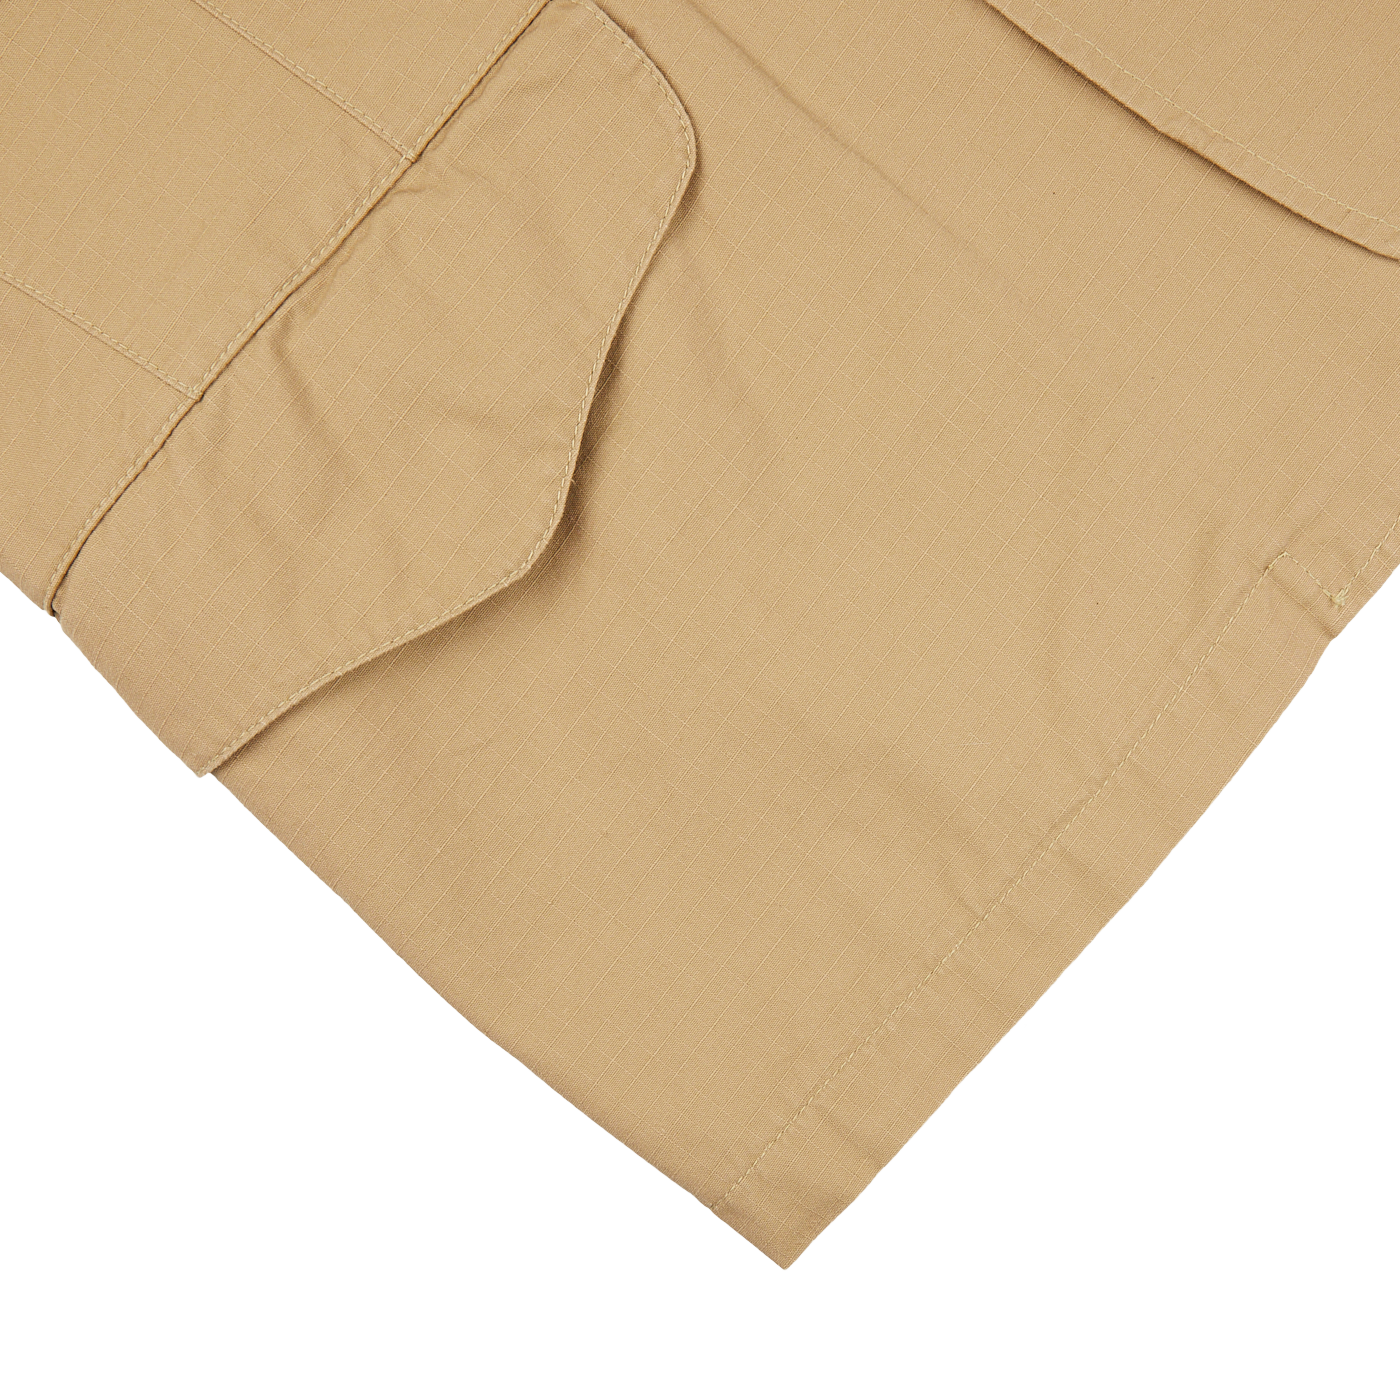 A Camel Beige Ripstop Cotton Bush Jacket with a pocket on the side made from ripstop cotton by Manifattura Ceccarelli.